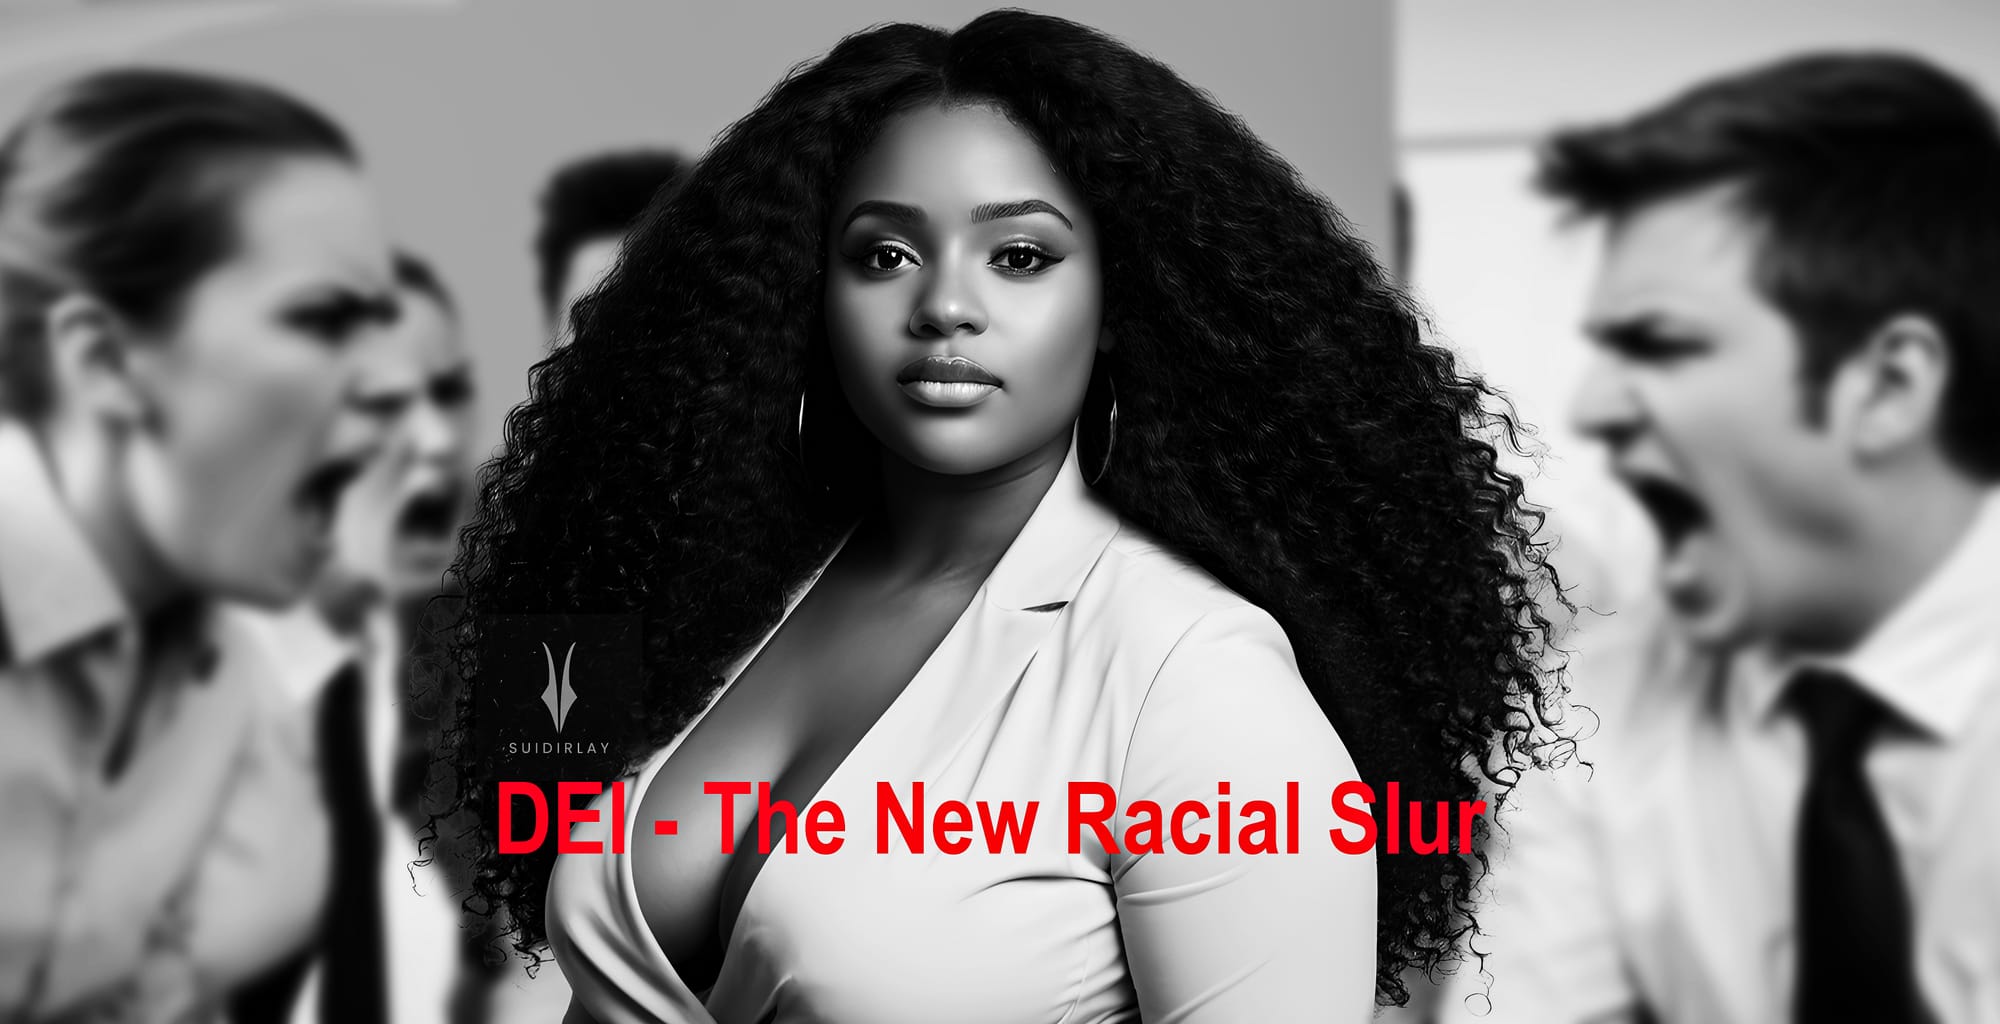 DEI, the new racial slur used against Black professionals regardless of their qualifications